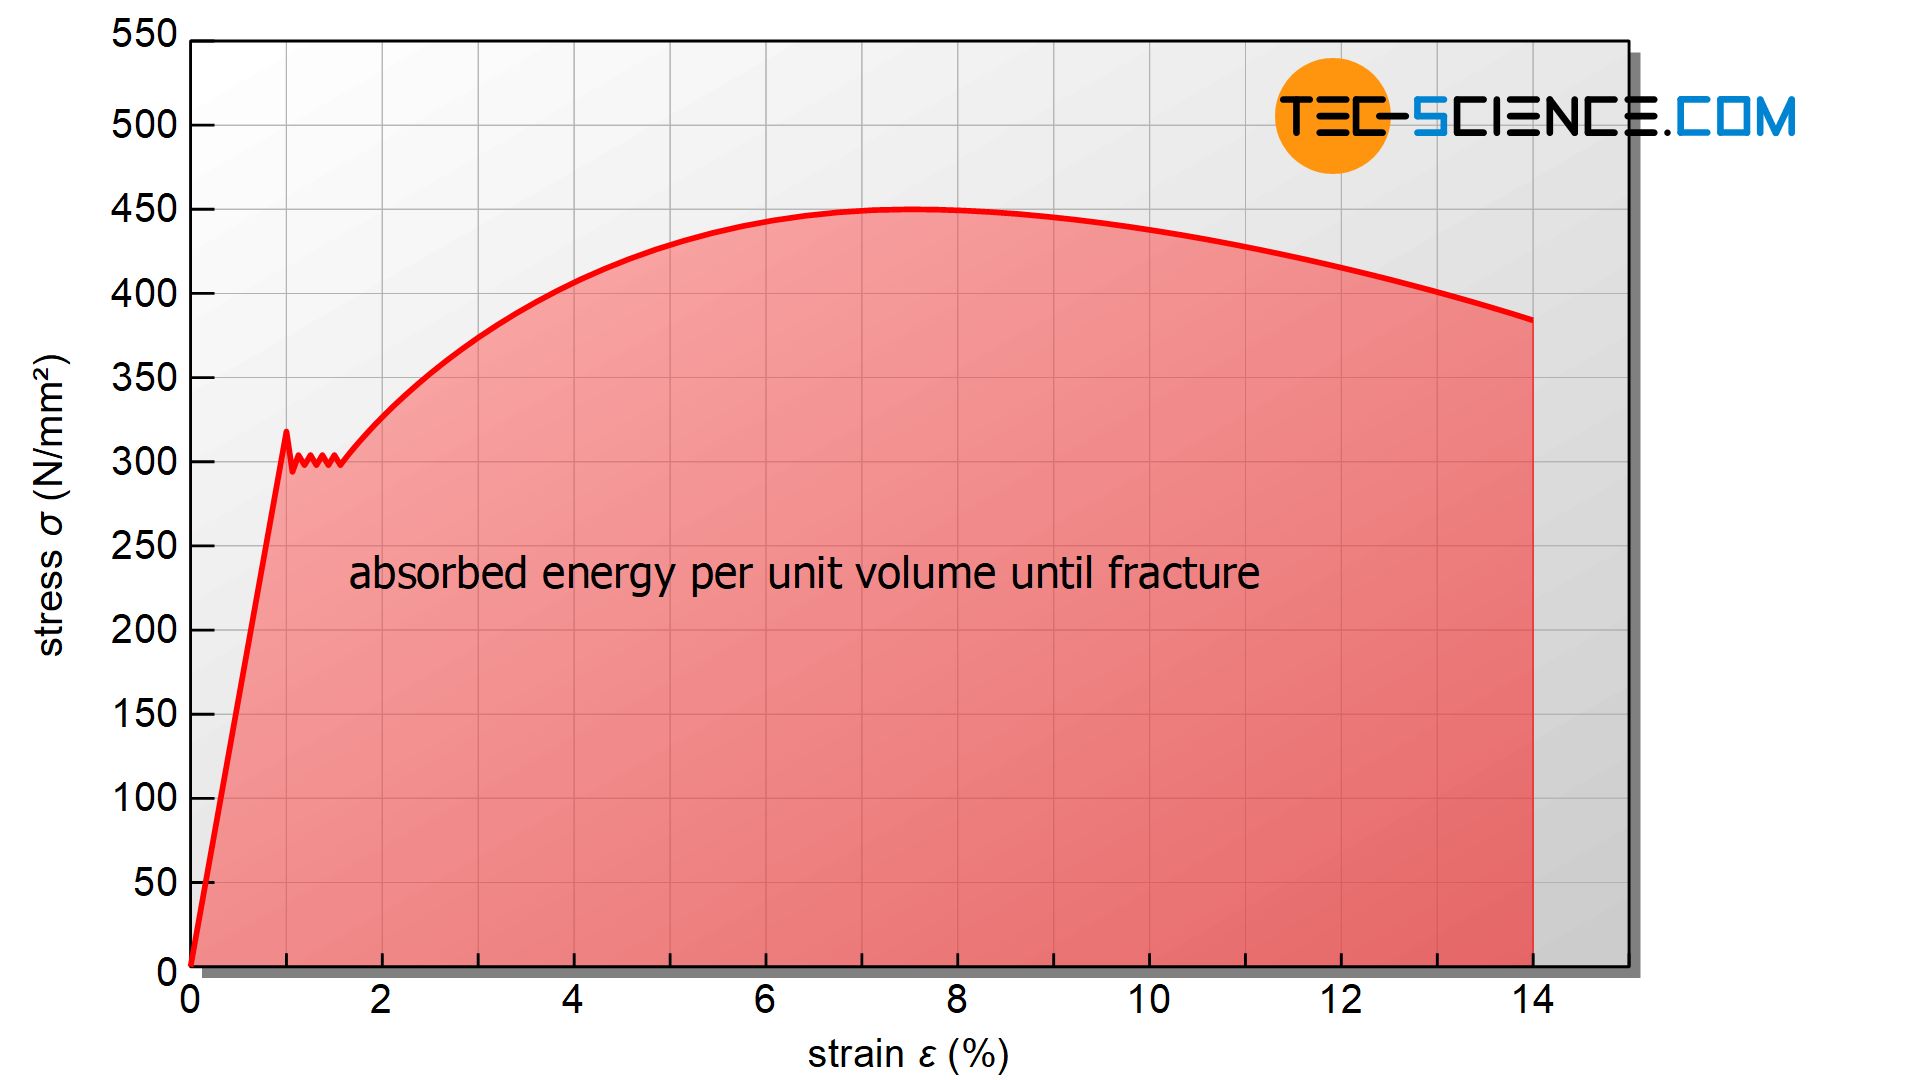 Absorbed energy per unit volume until fracture